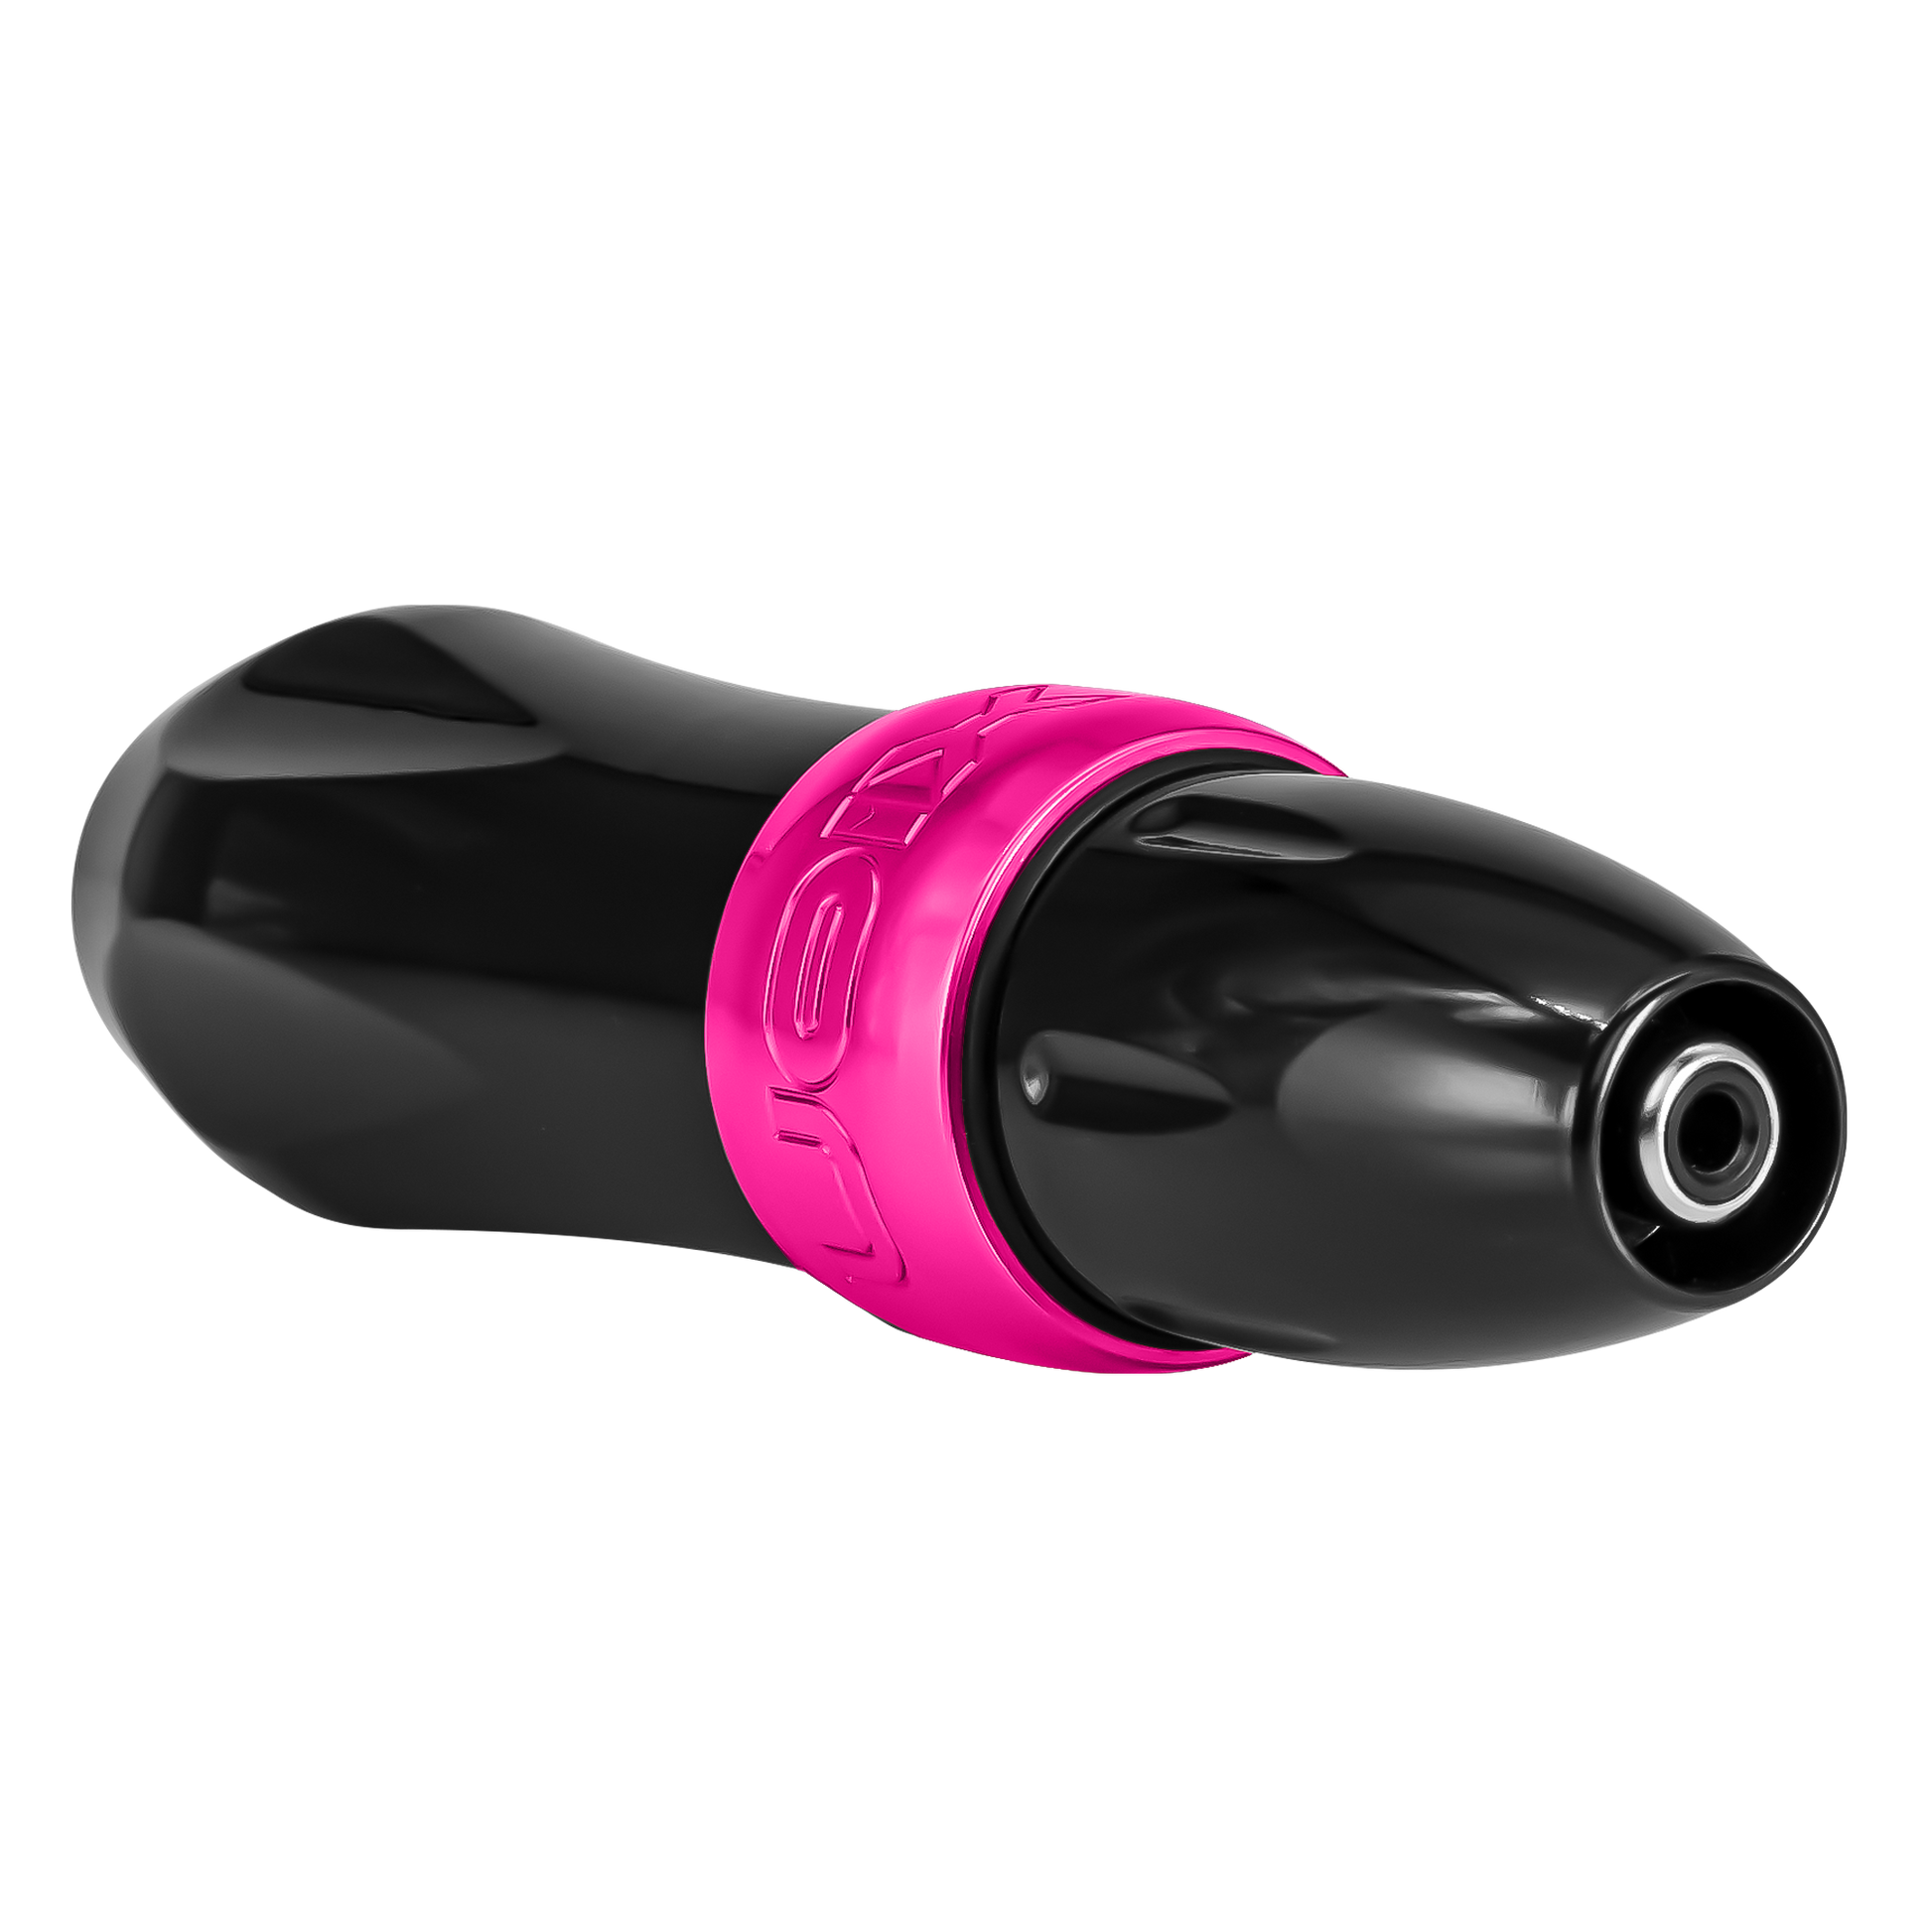 Spectra Xion tattoo machine in black with a bright pink band on the machine body, view of the plug